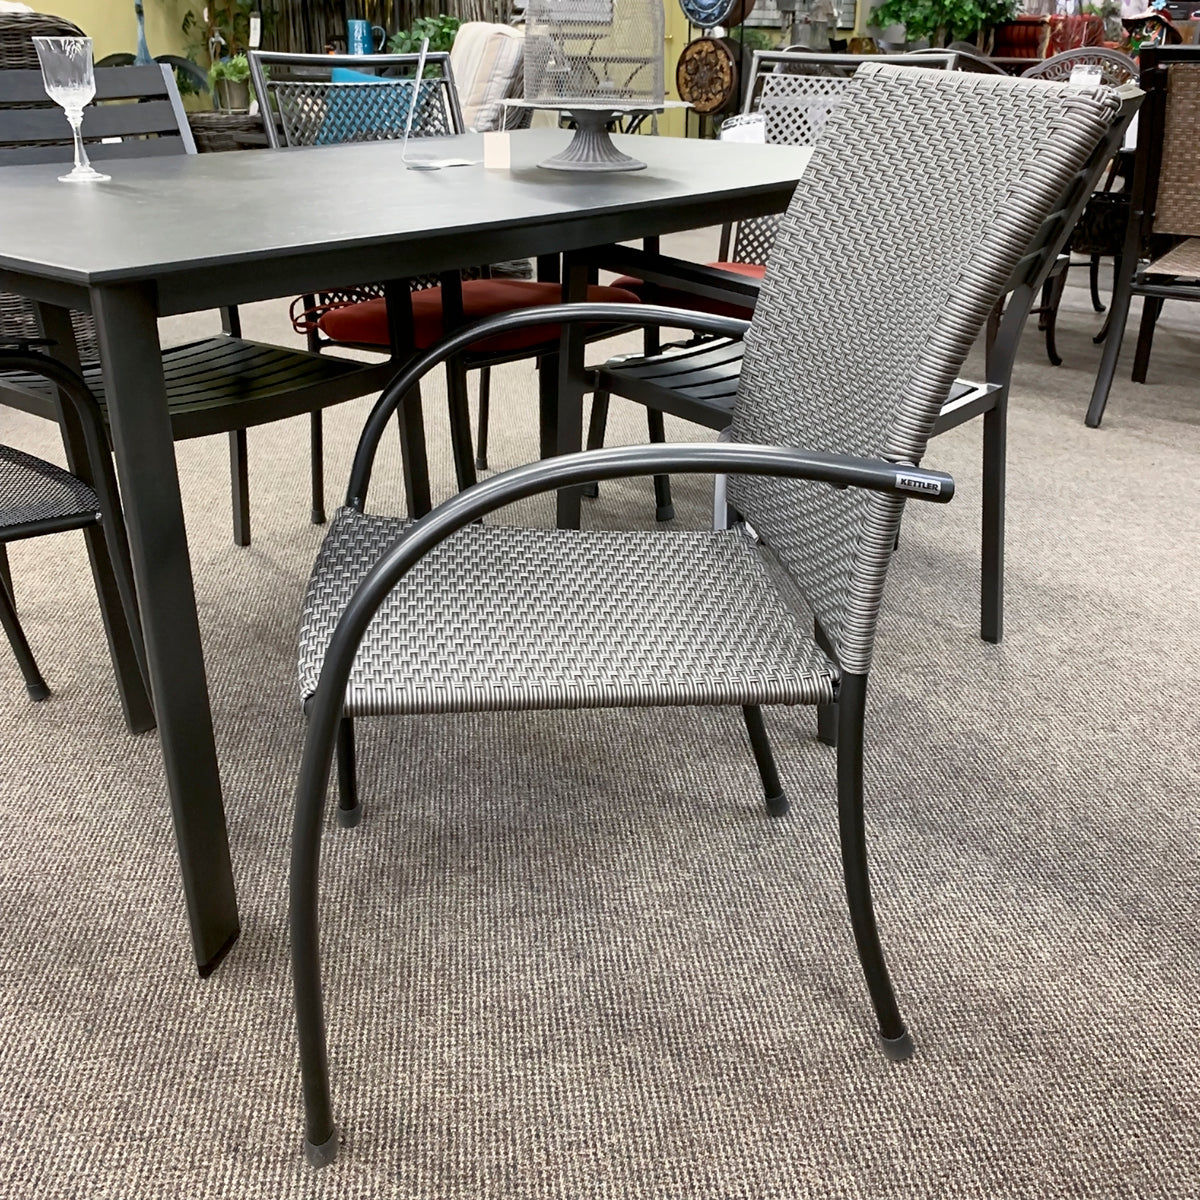 Kettler Pilano Outdoor Patio Dining Arm Chair is available in our Jacobs Custom Living Spokane Valley Showroom.